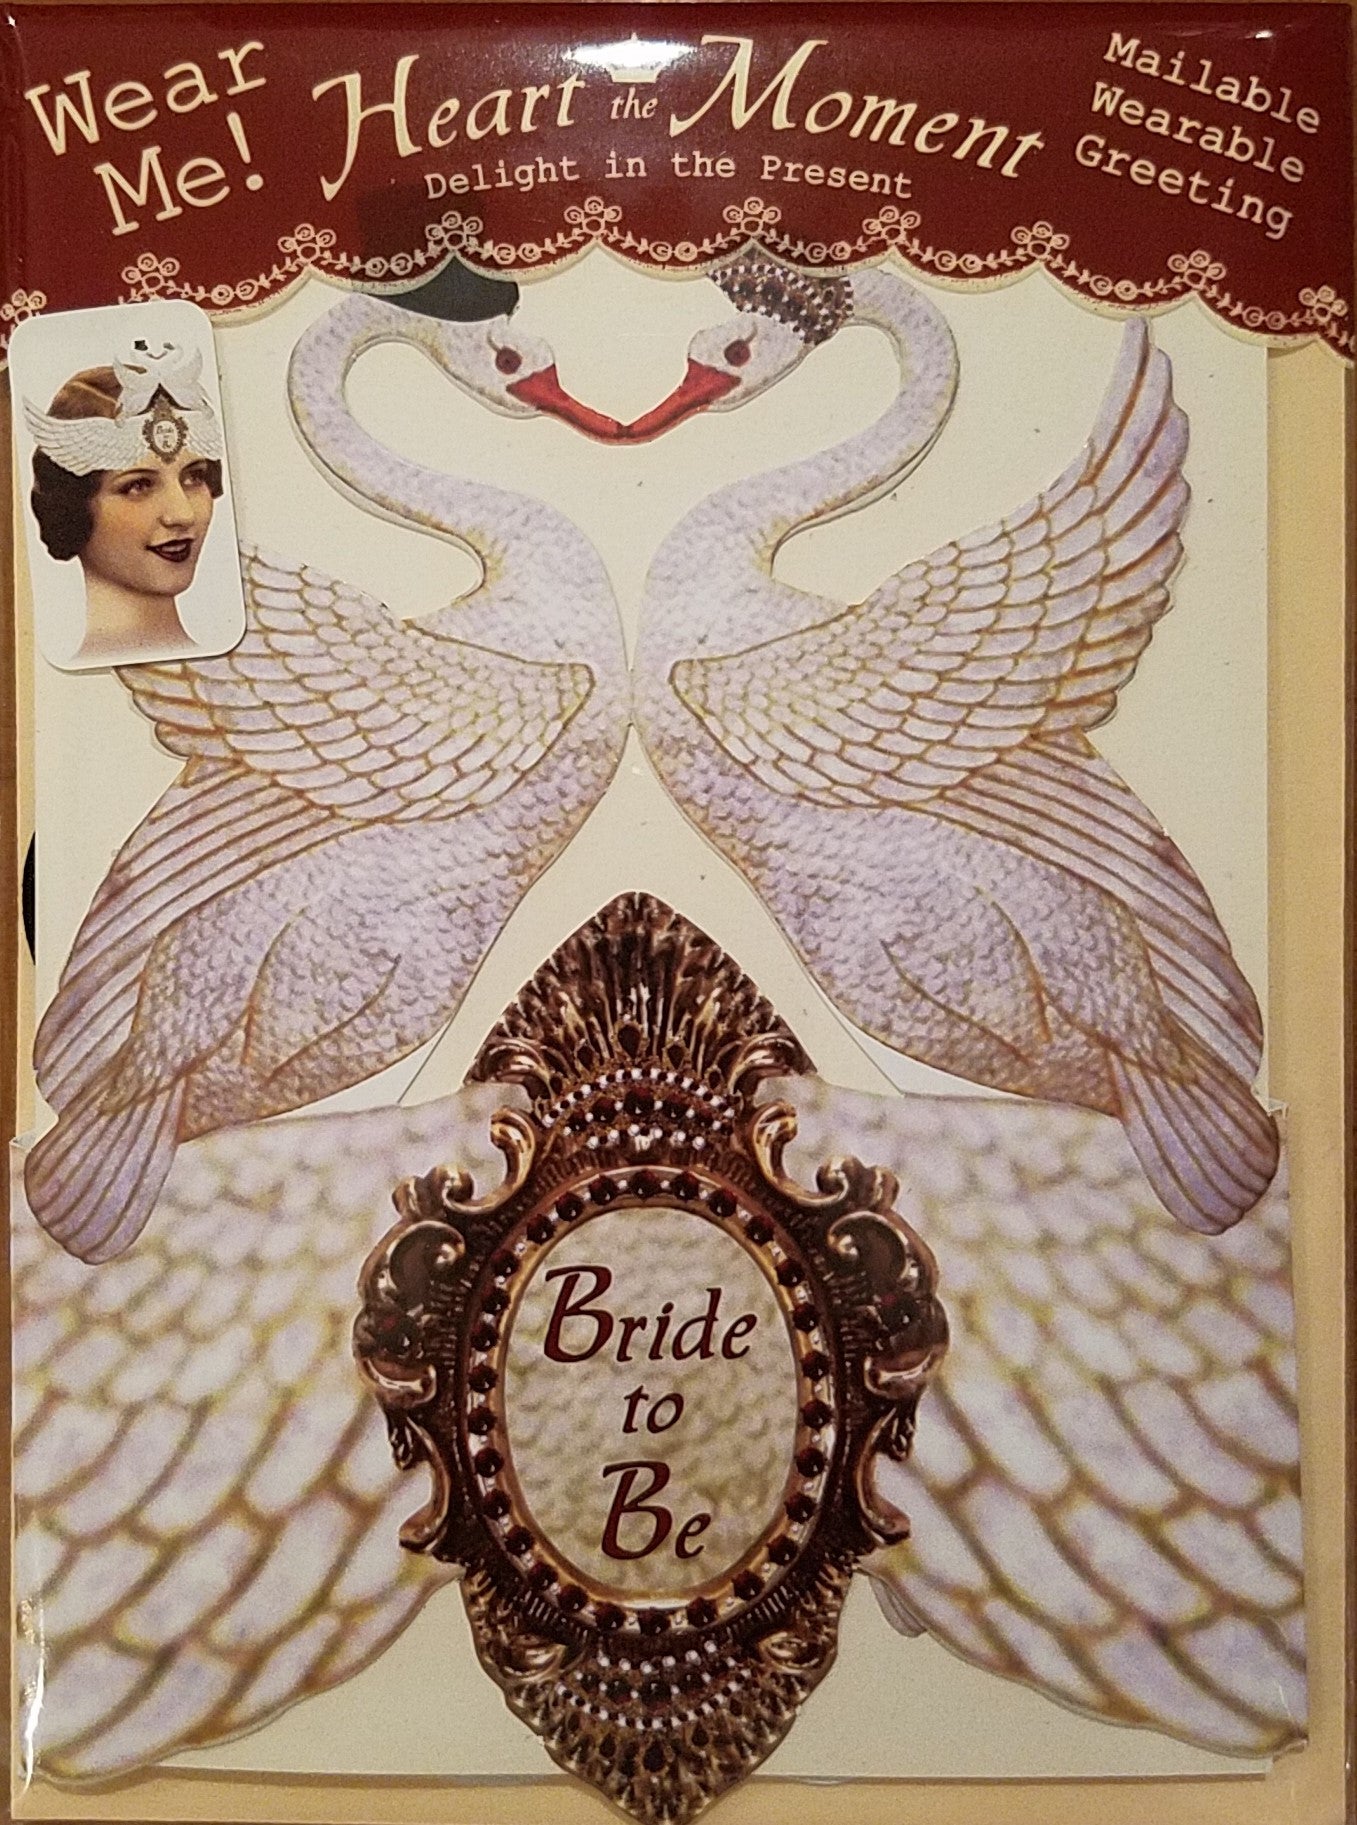 Bride Tiara - Our Nation's Creations